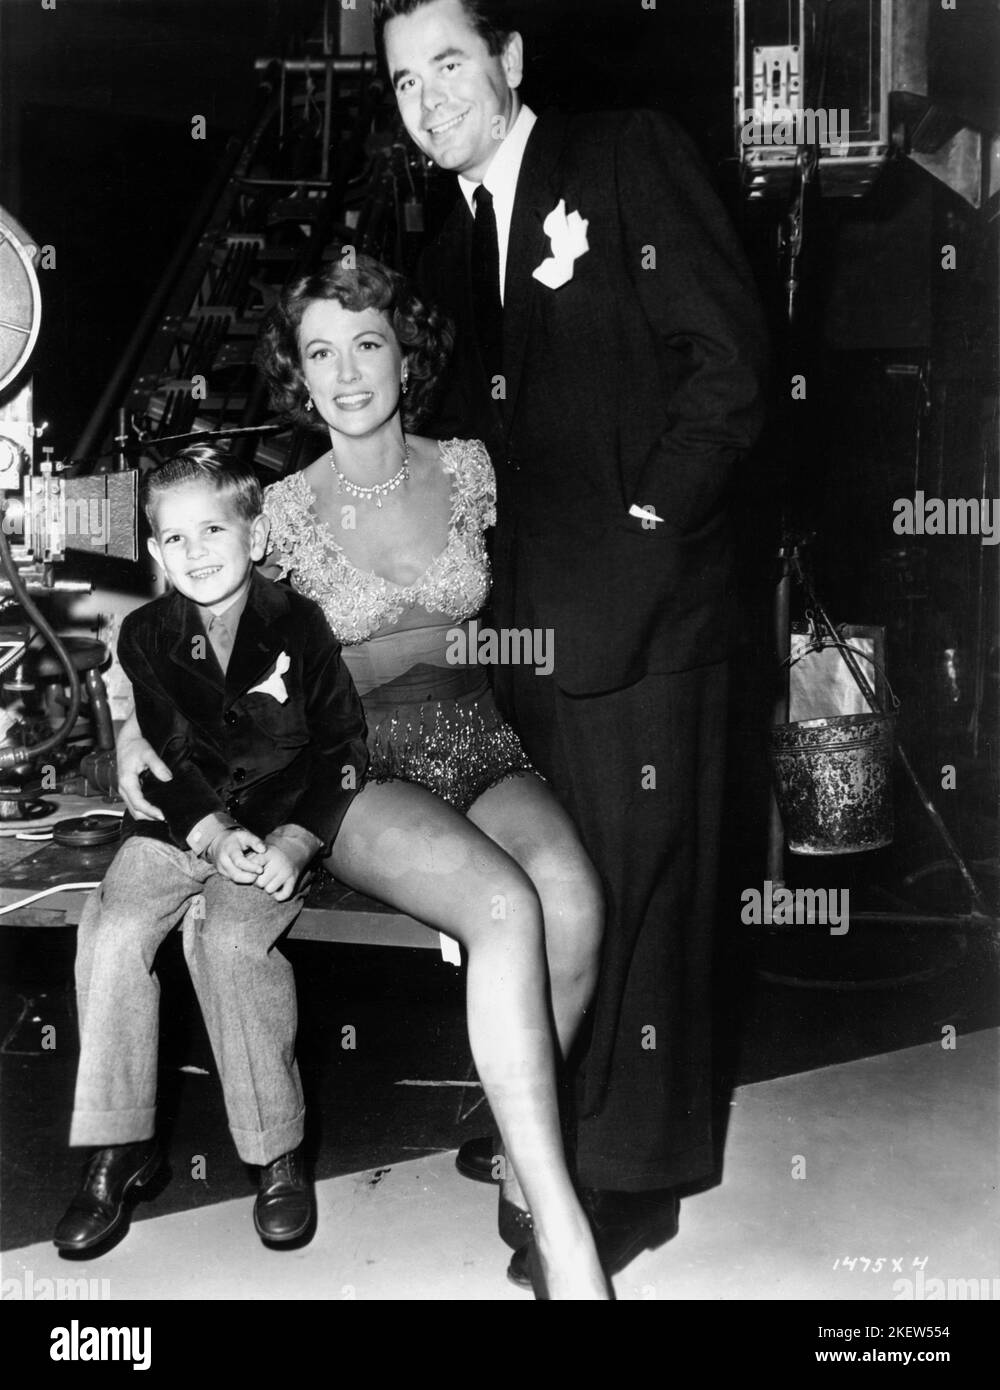 ELEANOR POWELL with set visitors husband GLENN FORD with their 5-year-old son PETER FORD on set candid in late 1949 during filming of her guest dance spot (and last film appearance) in DUCHESS OF IDAHO 1950 director ROBERT Z. LEONARD Metro Goldwyn Mayer Stock Photo